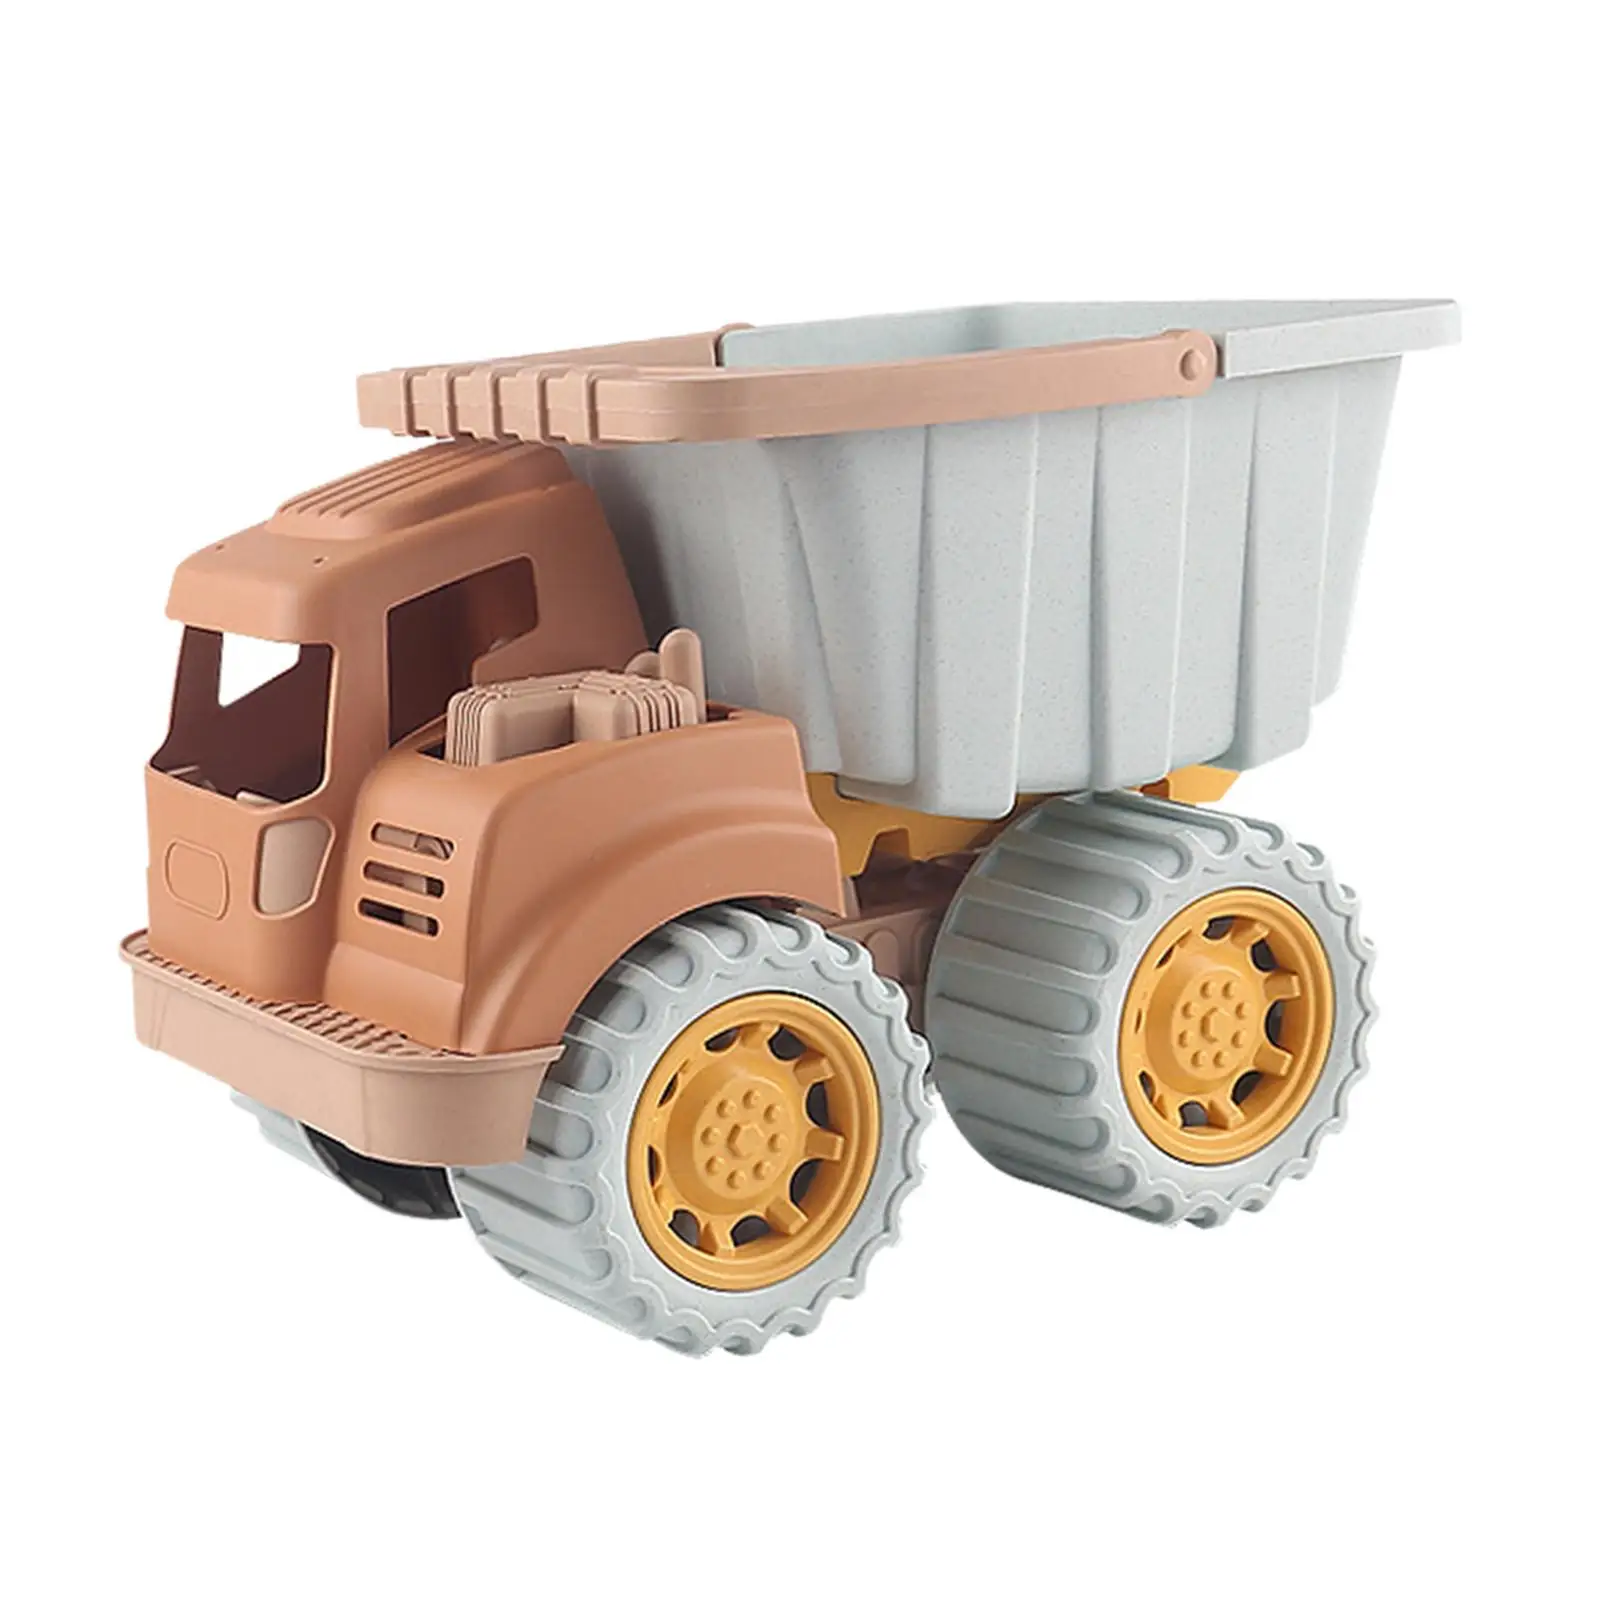 Beach Toy Dump Trucks Durable Push and go for Party Favors Indoors Outdoors Boys Girls Children Aged 3 4 5